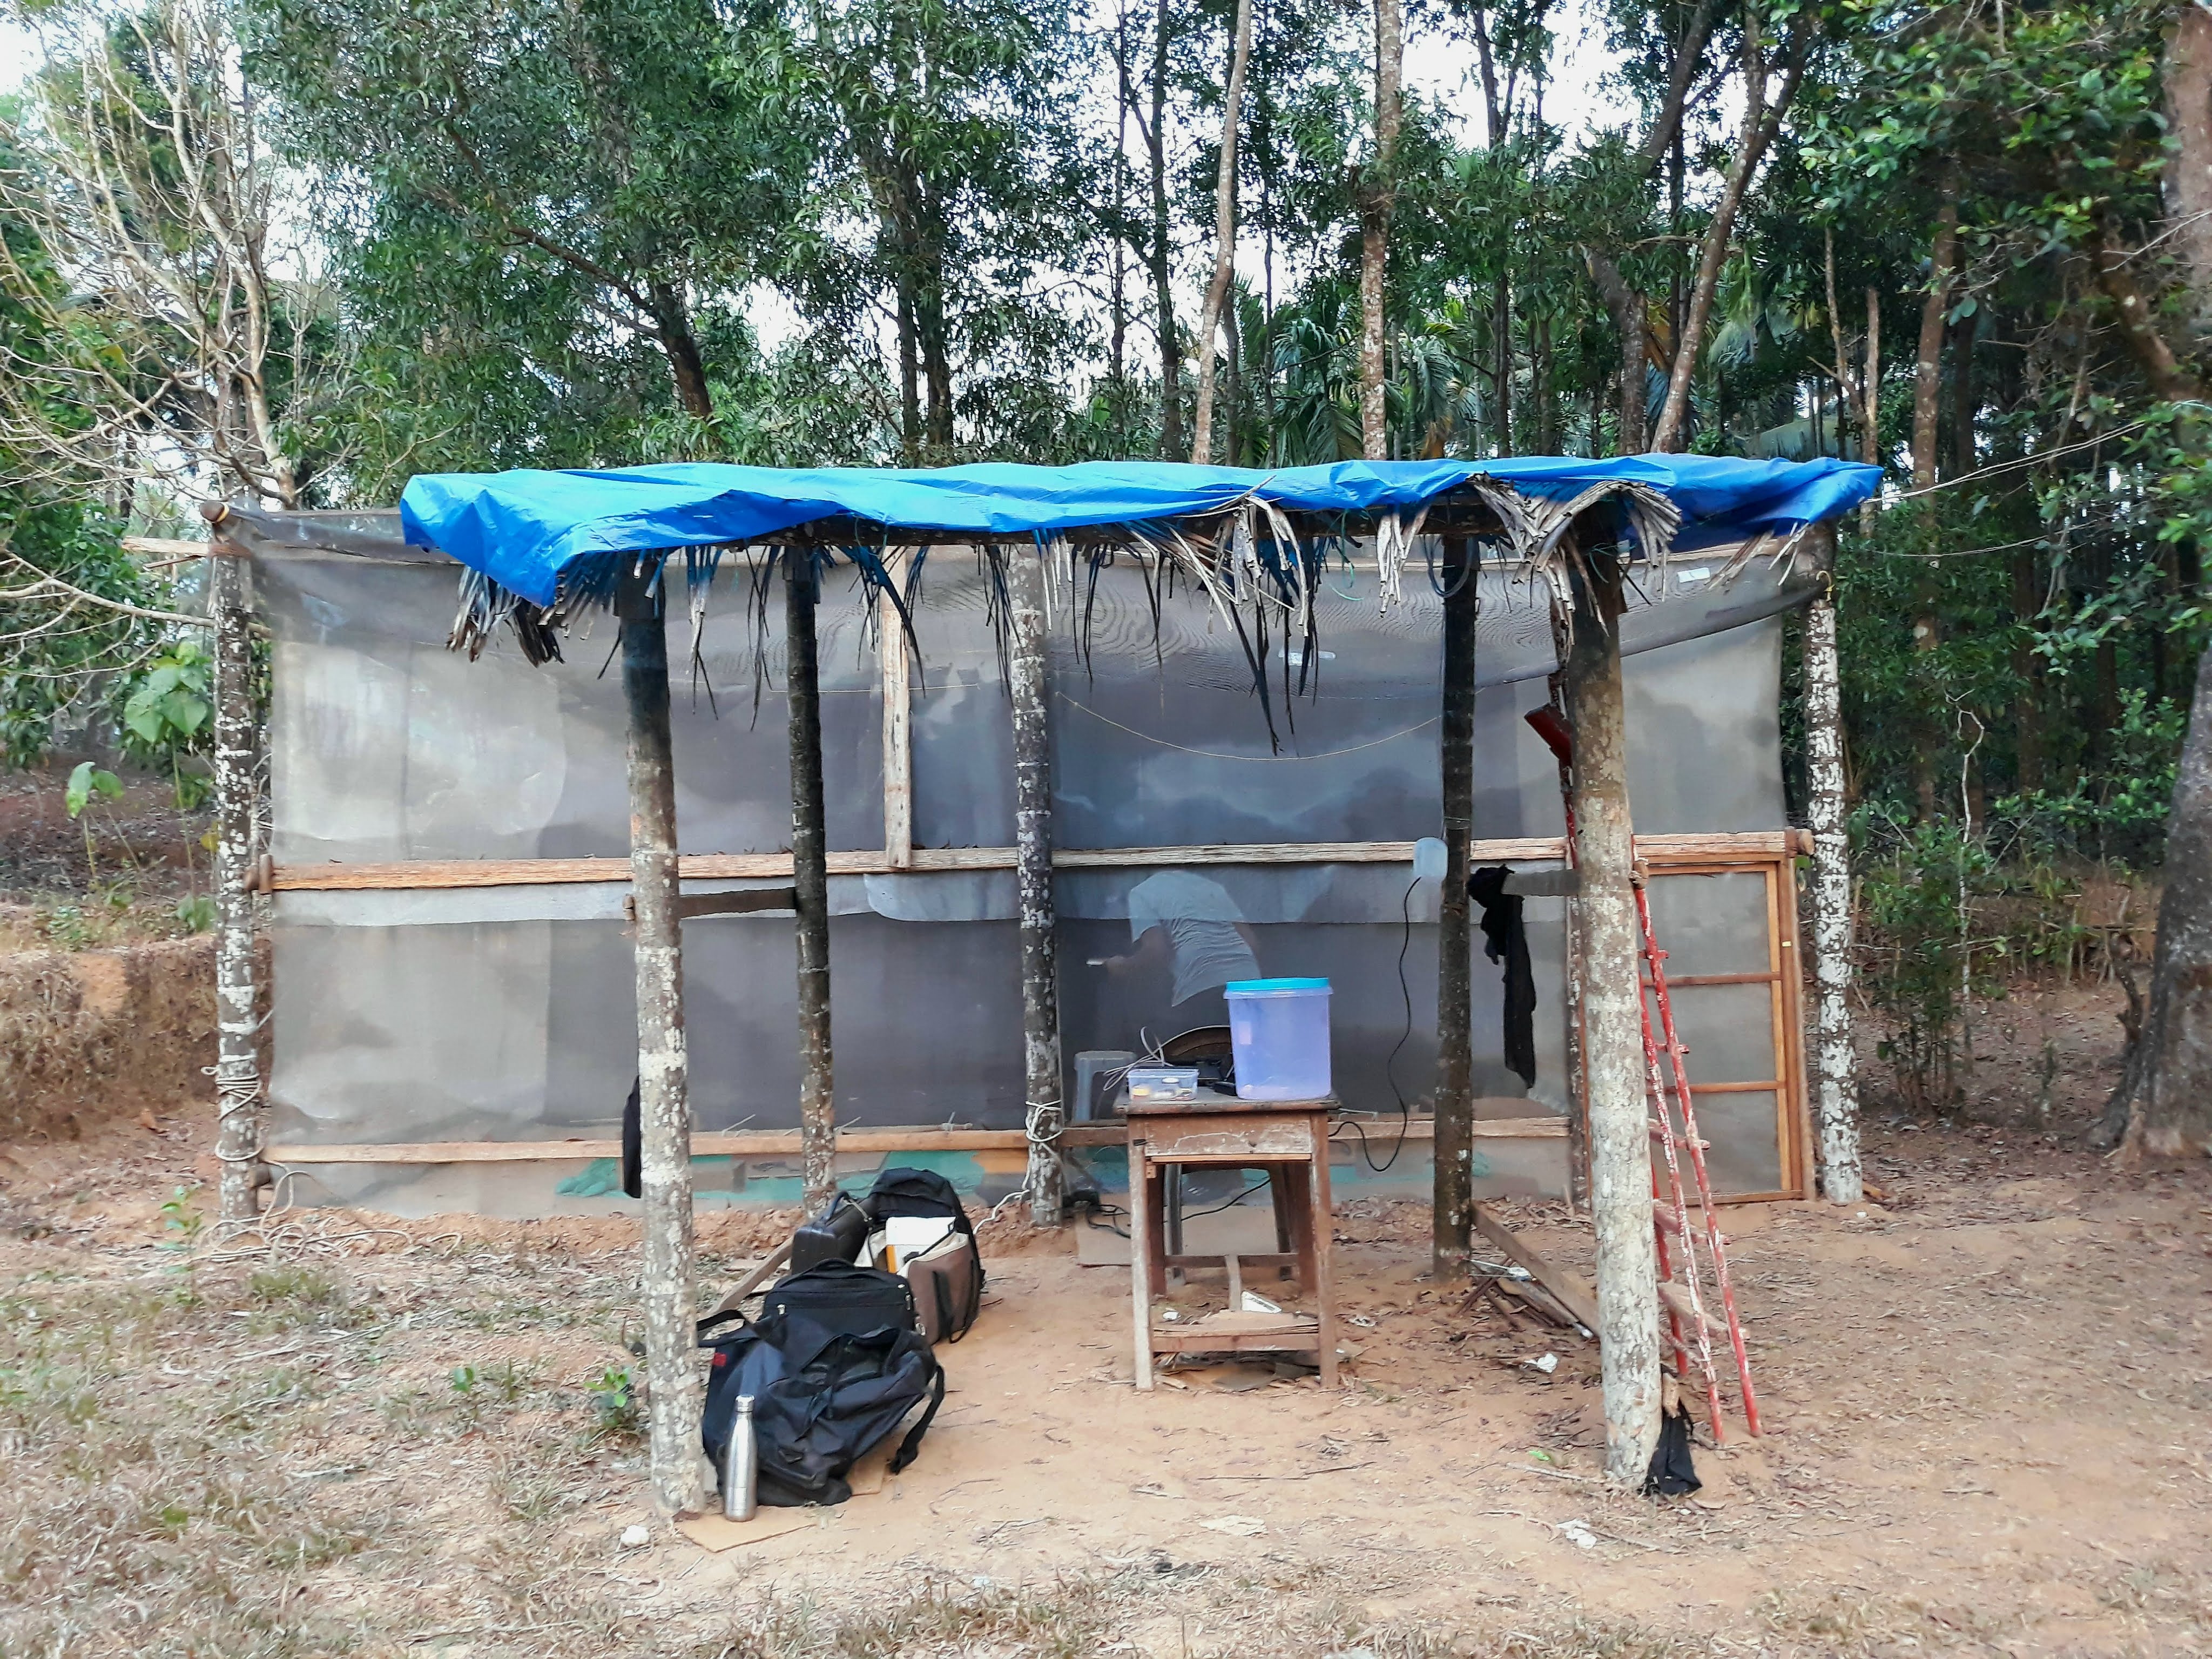 An outdoor structure with a roof used for conducting experiments.